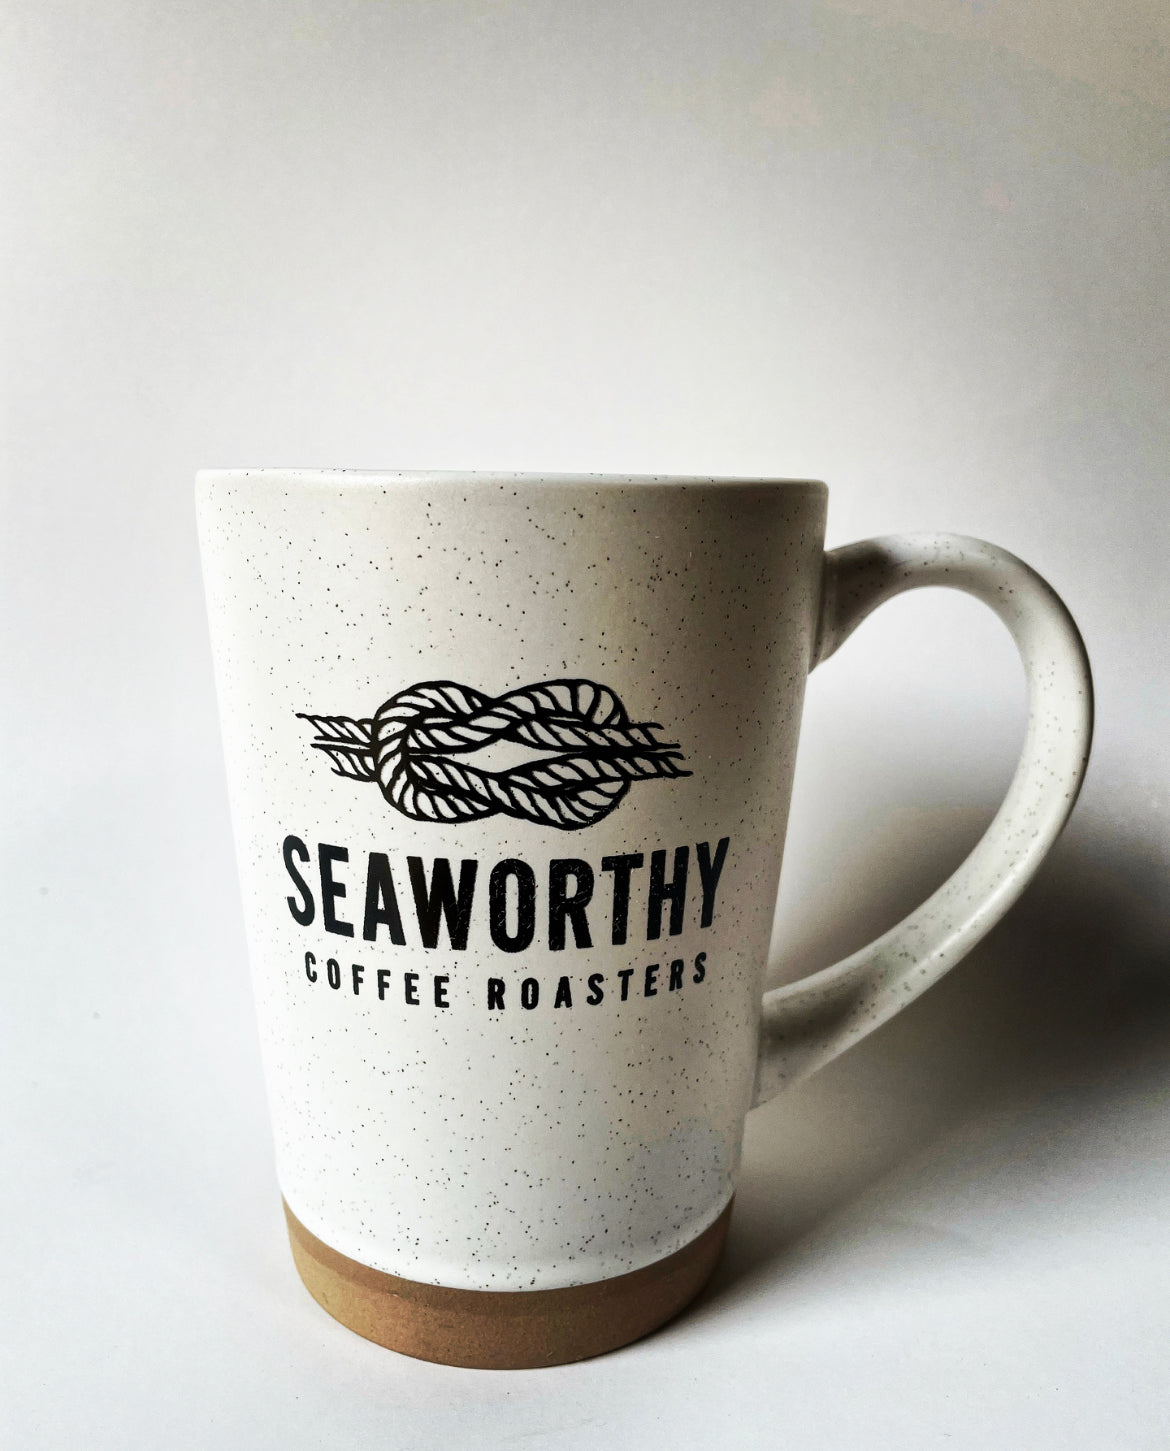 Our third edition mugs are here!  The Seaworthy Clay Coffee Mug features a 16 oz capacity, large handle, and a unique speckled glaze finish.  Dishwasher & Microwave safe